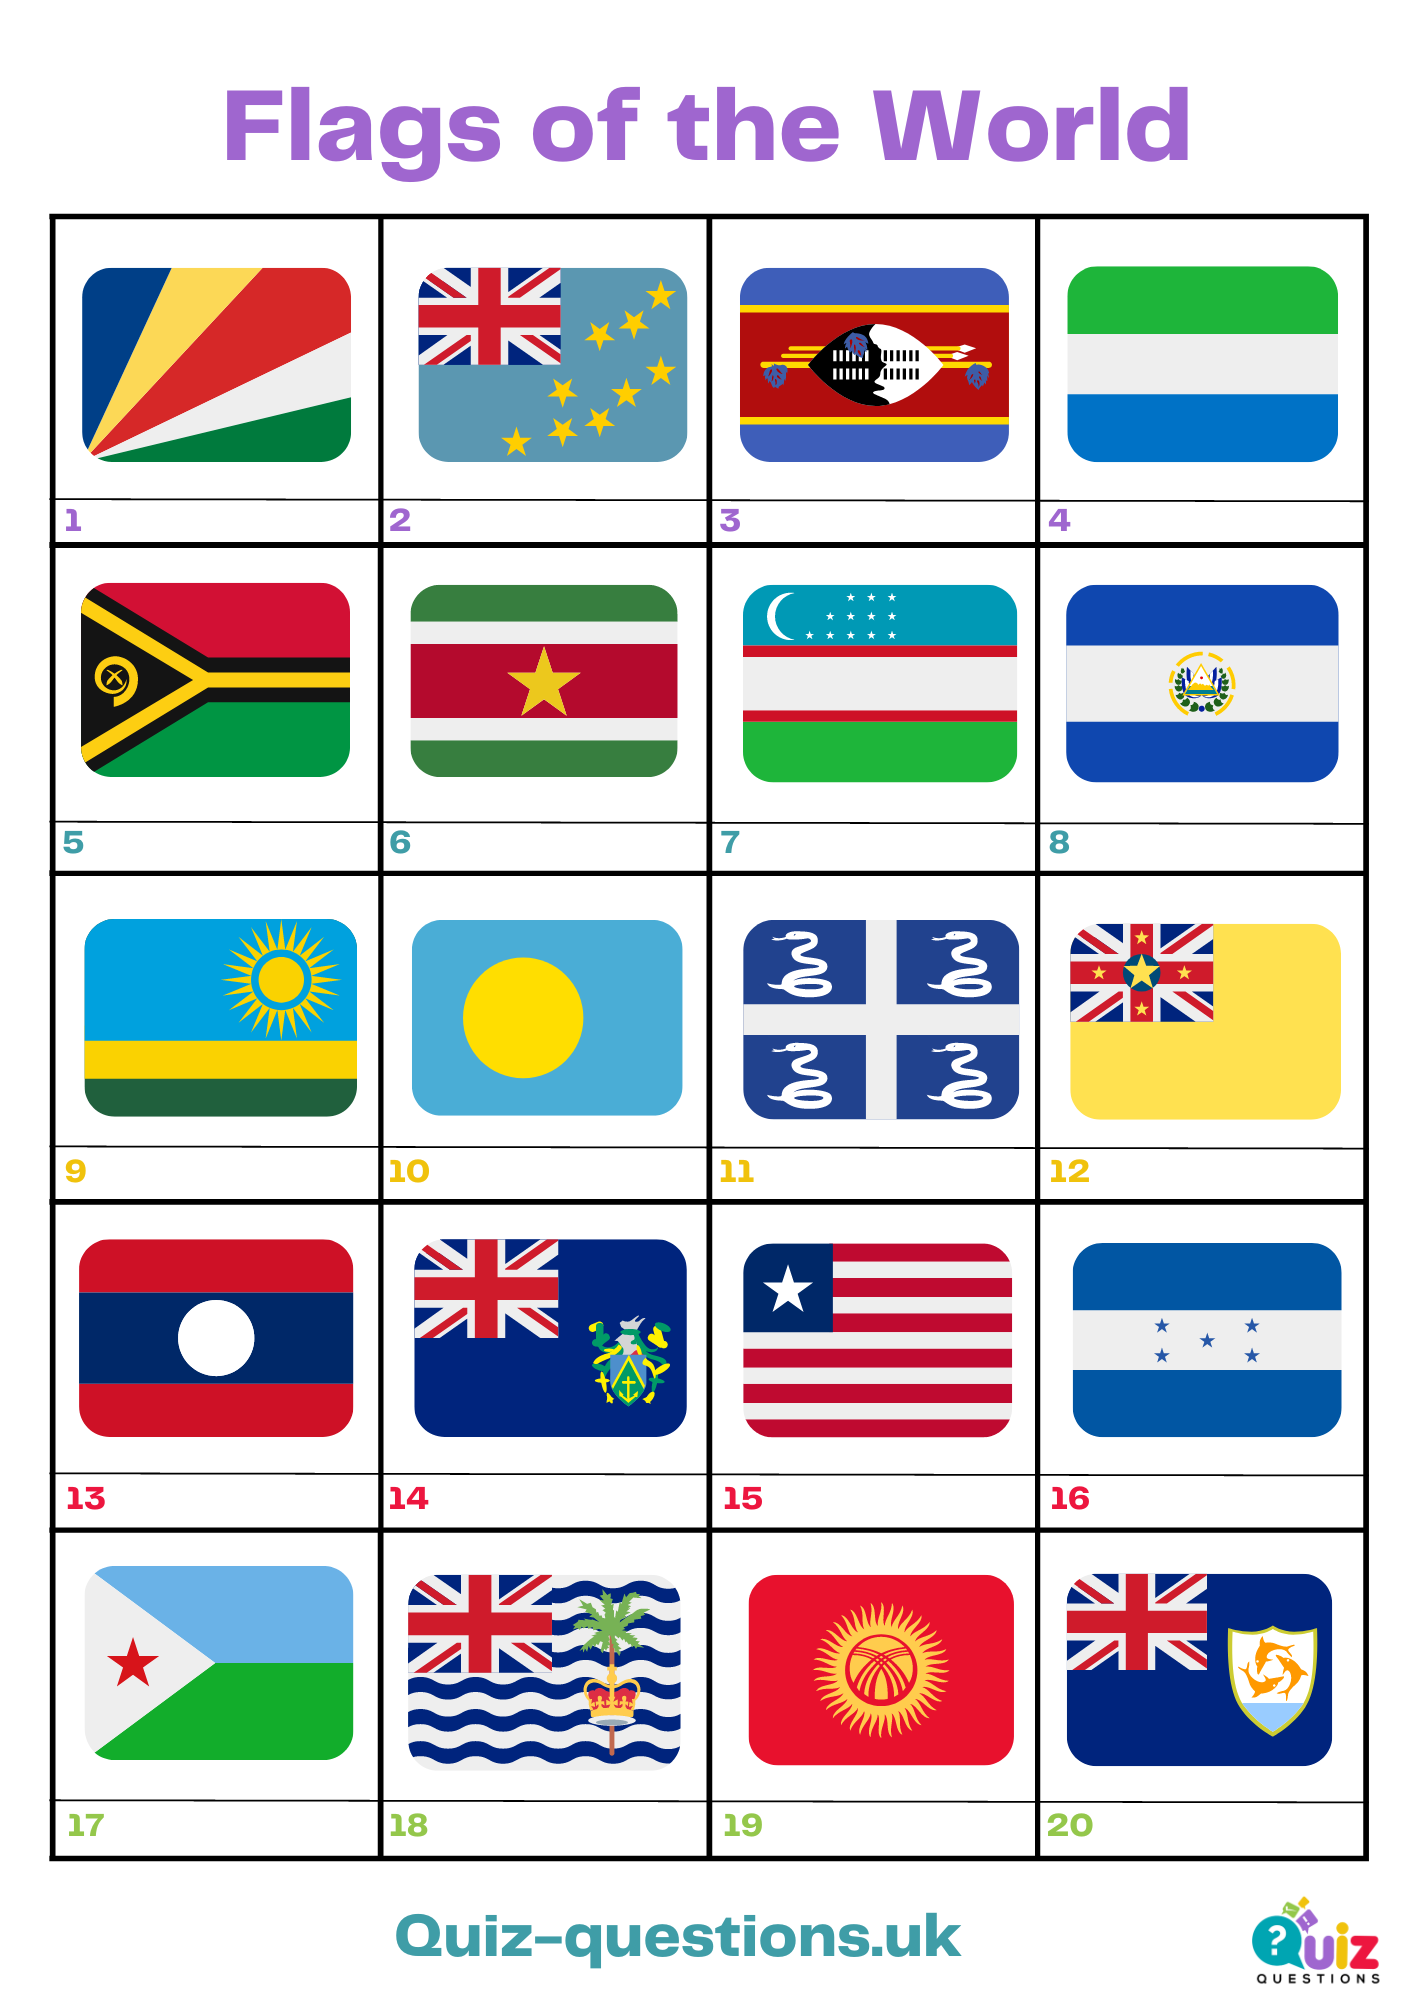 Flags of the world hard quiz